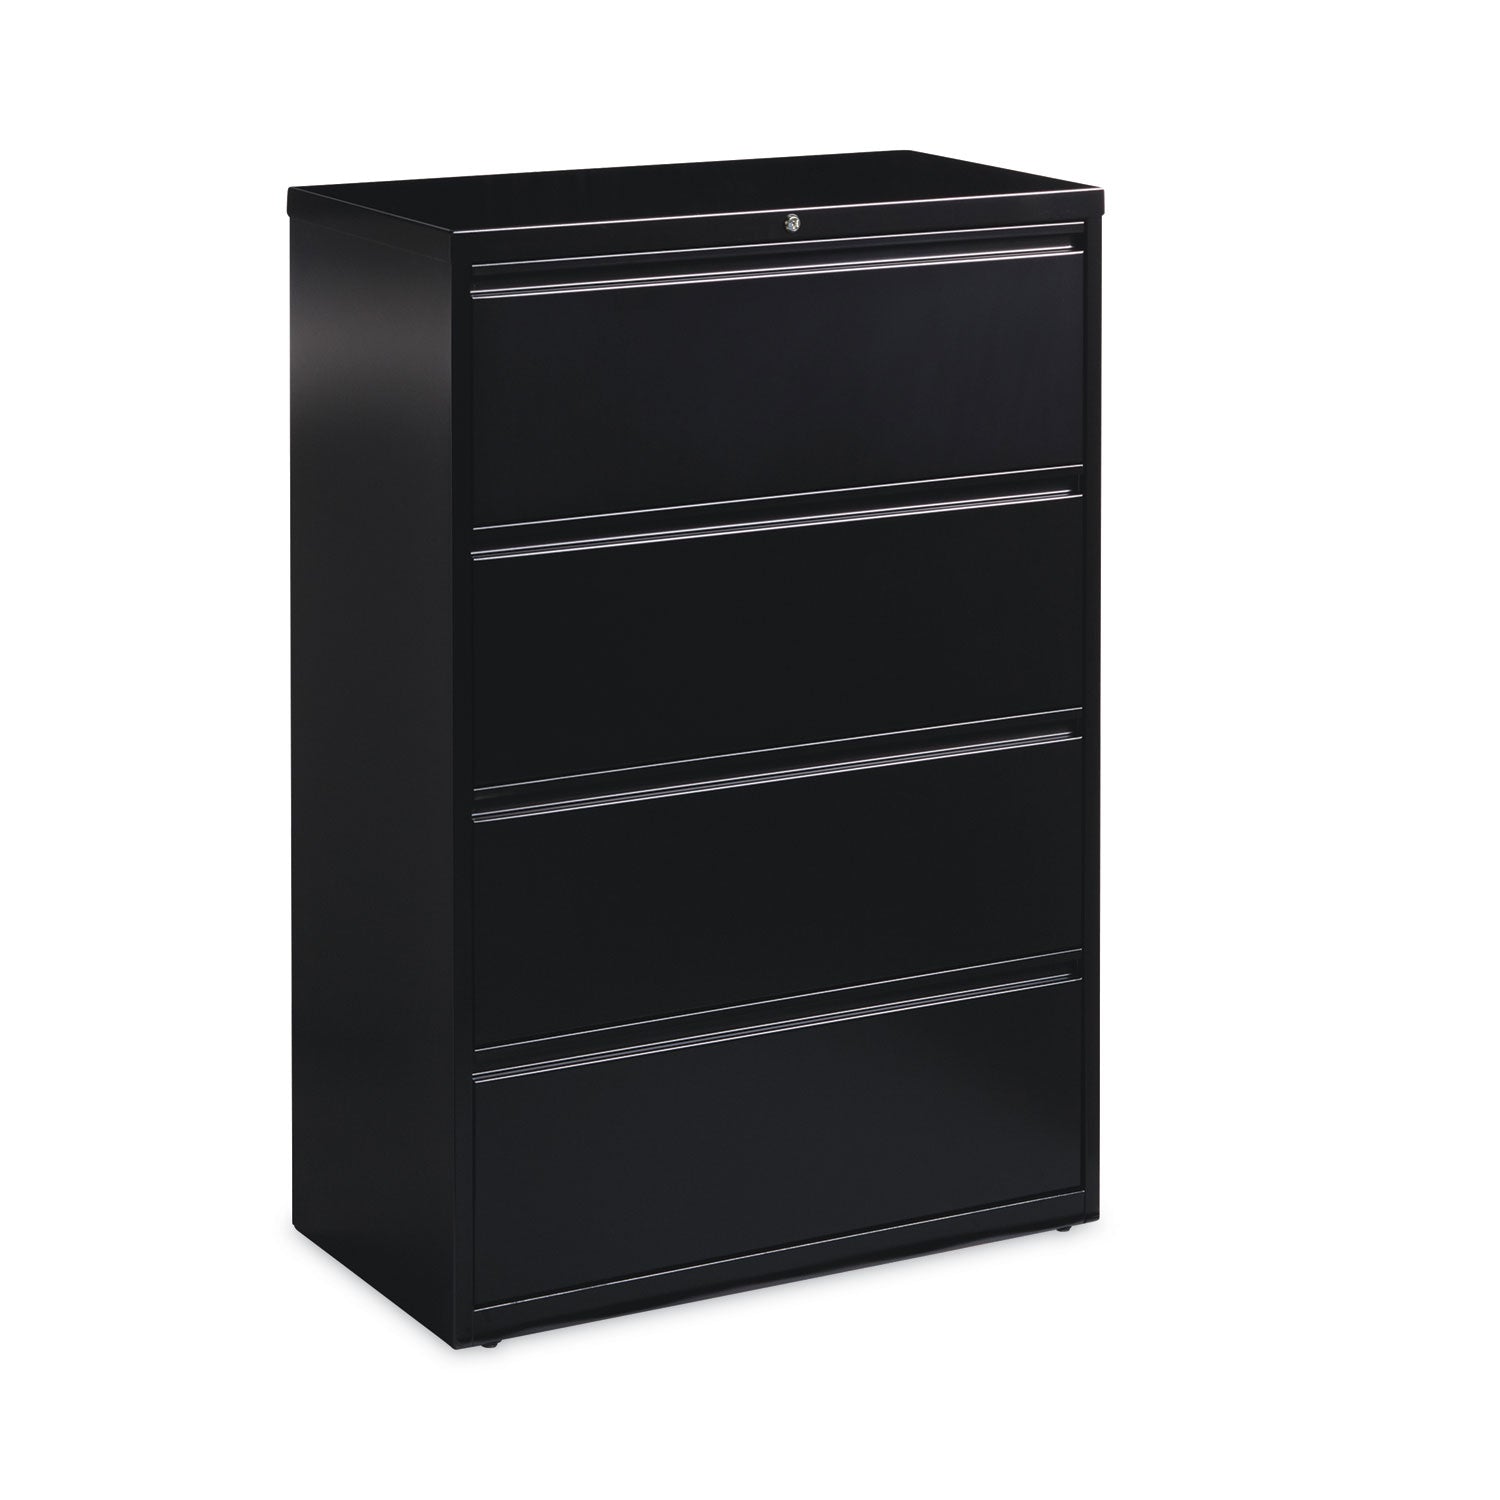 lateral-file-cabinet-4-letter-legal-a4-size-file-drawers-black-36-x-1862-x-525_hid14989 - 4